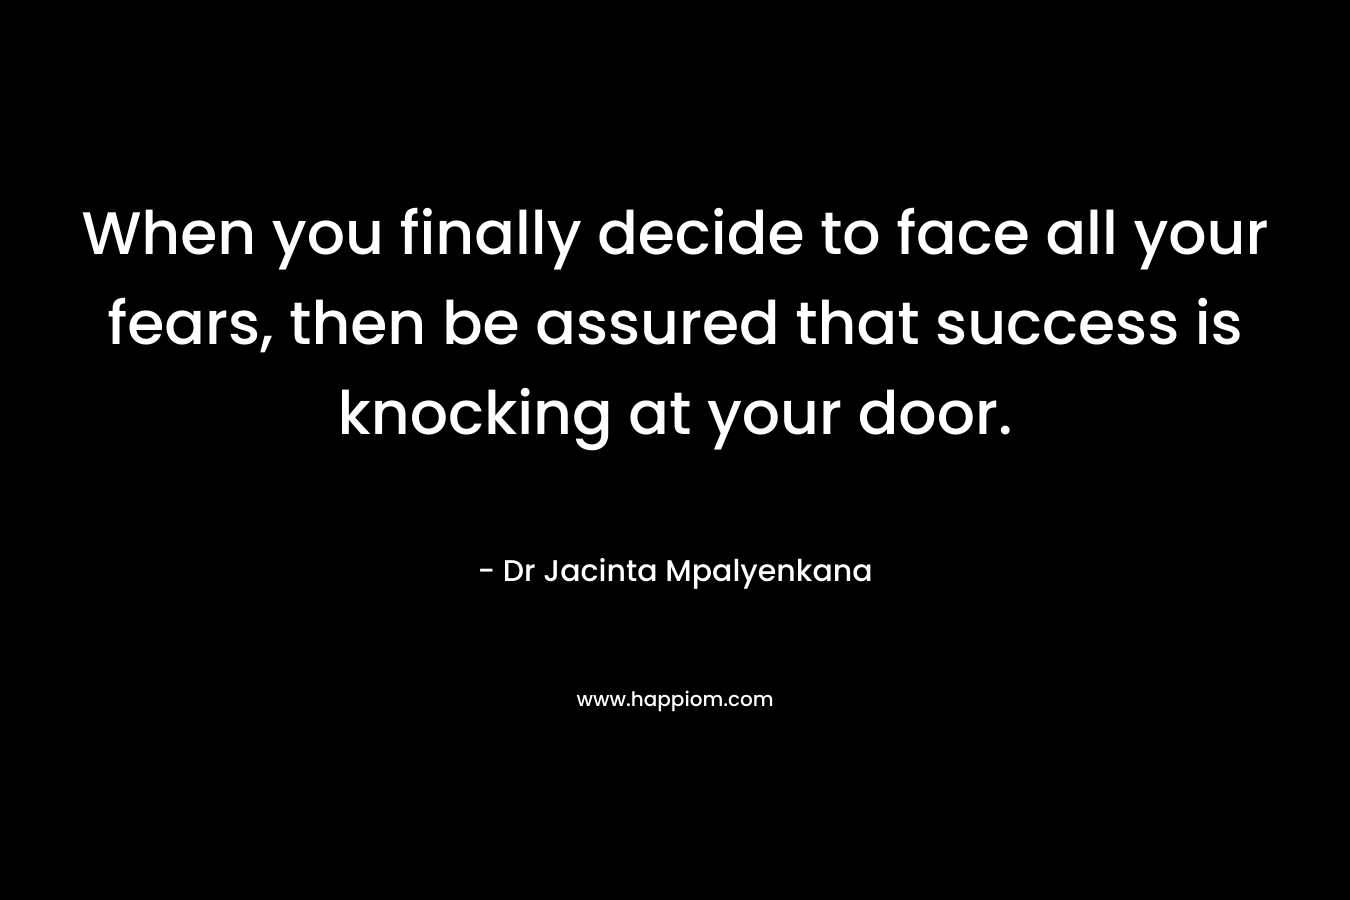 When you finally decide to face all your fears, then be assured that success is knocking at your door.